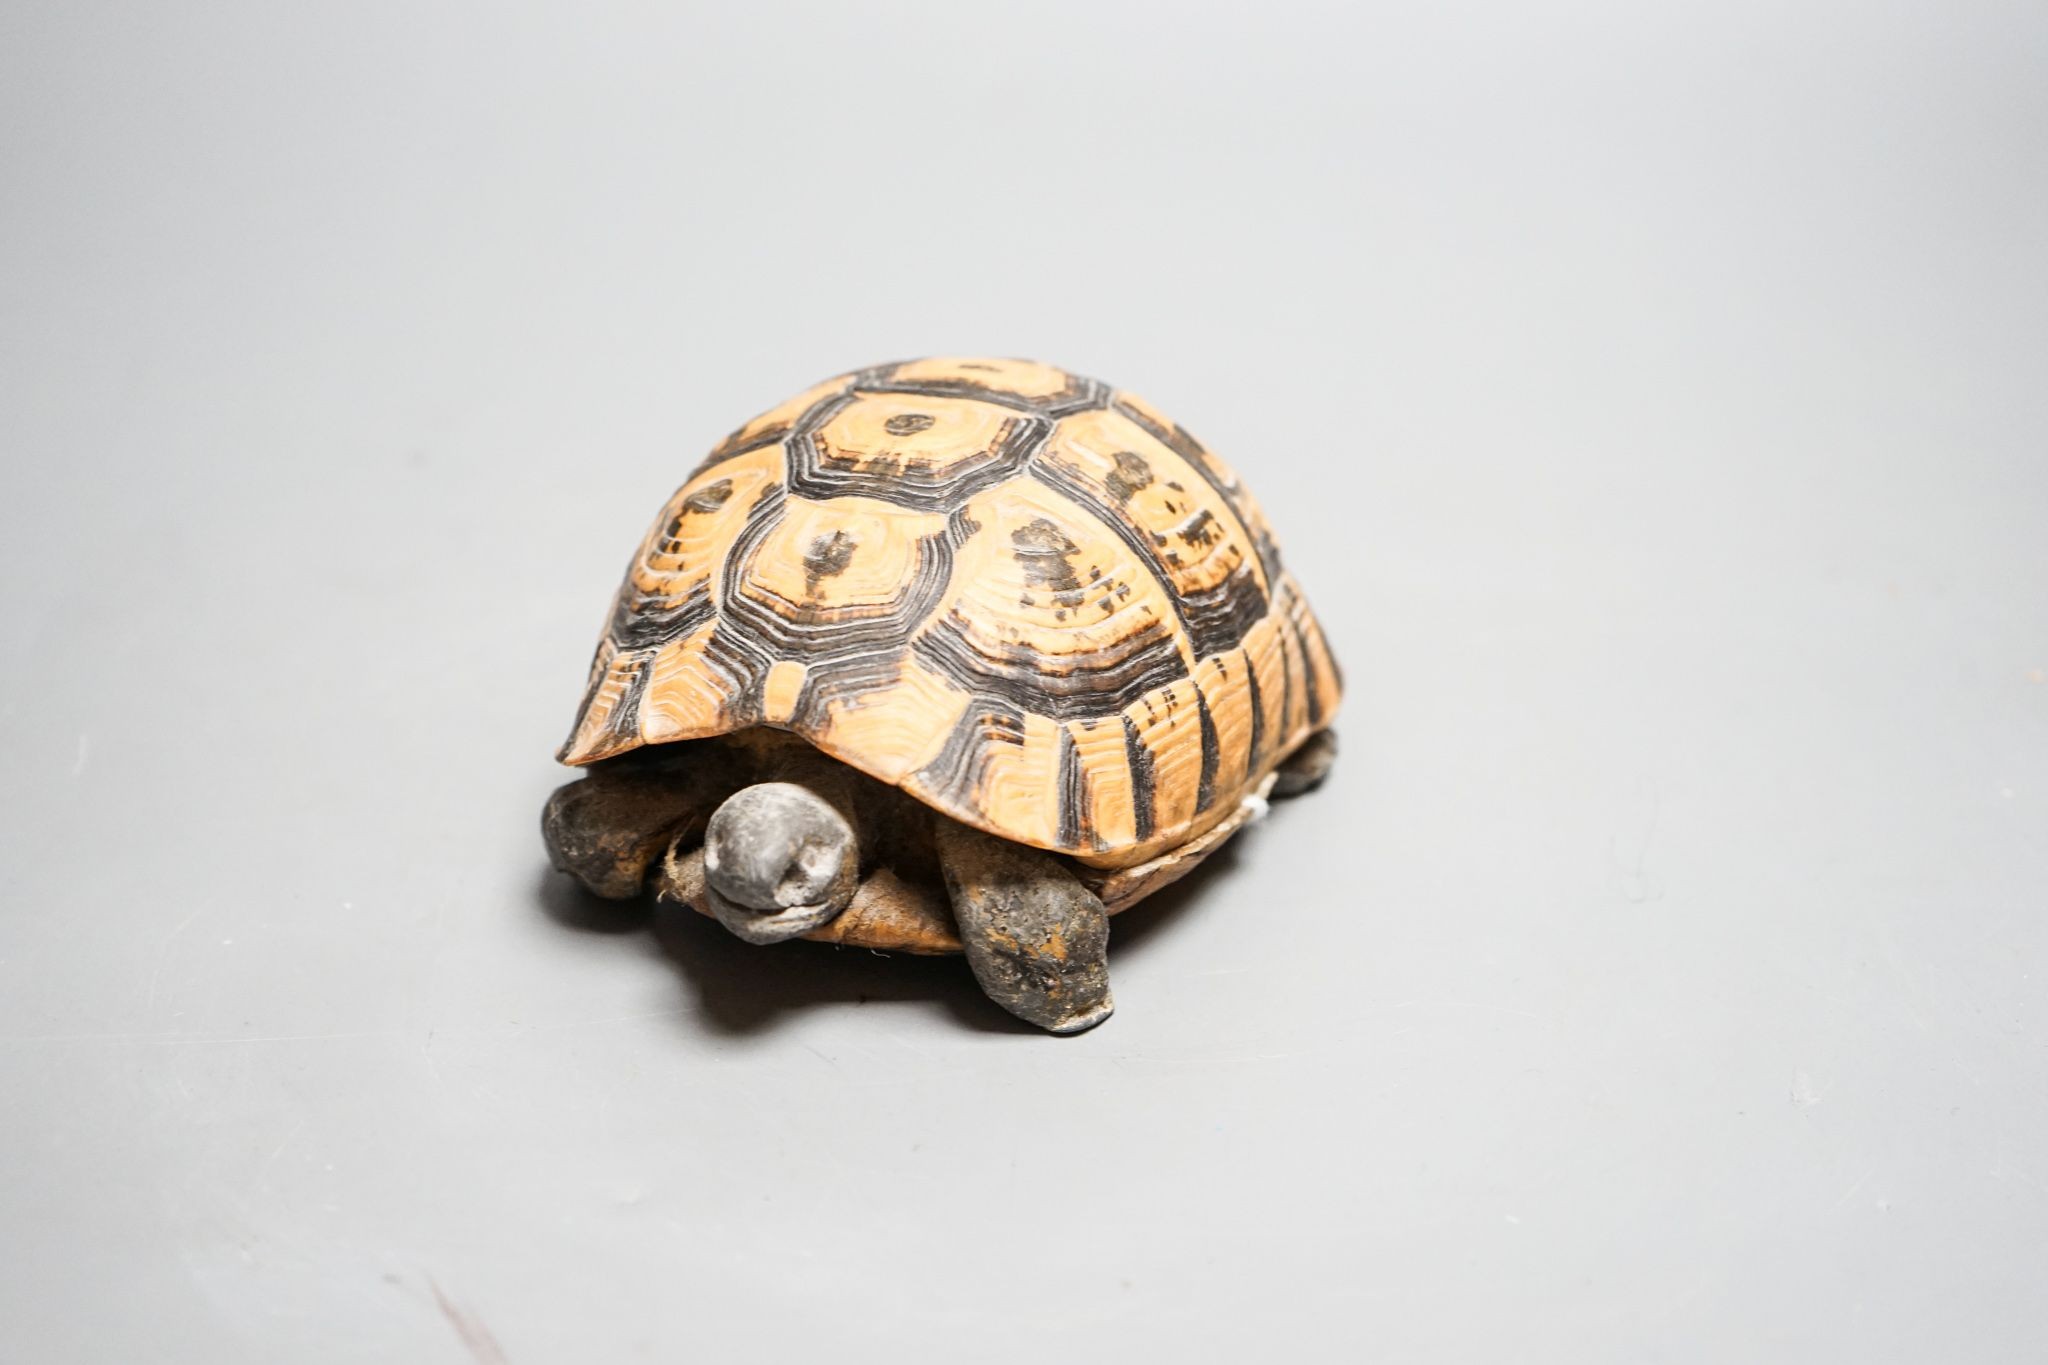 A tortoise carapace inkwell, 14cm